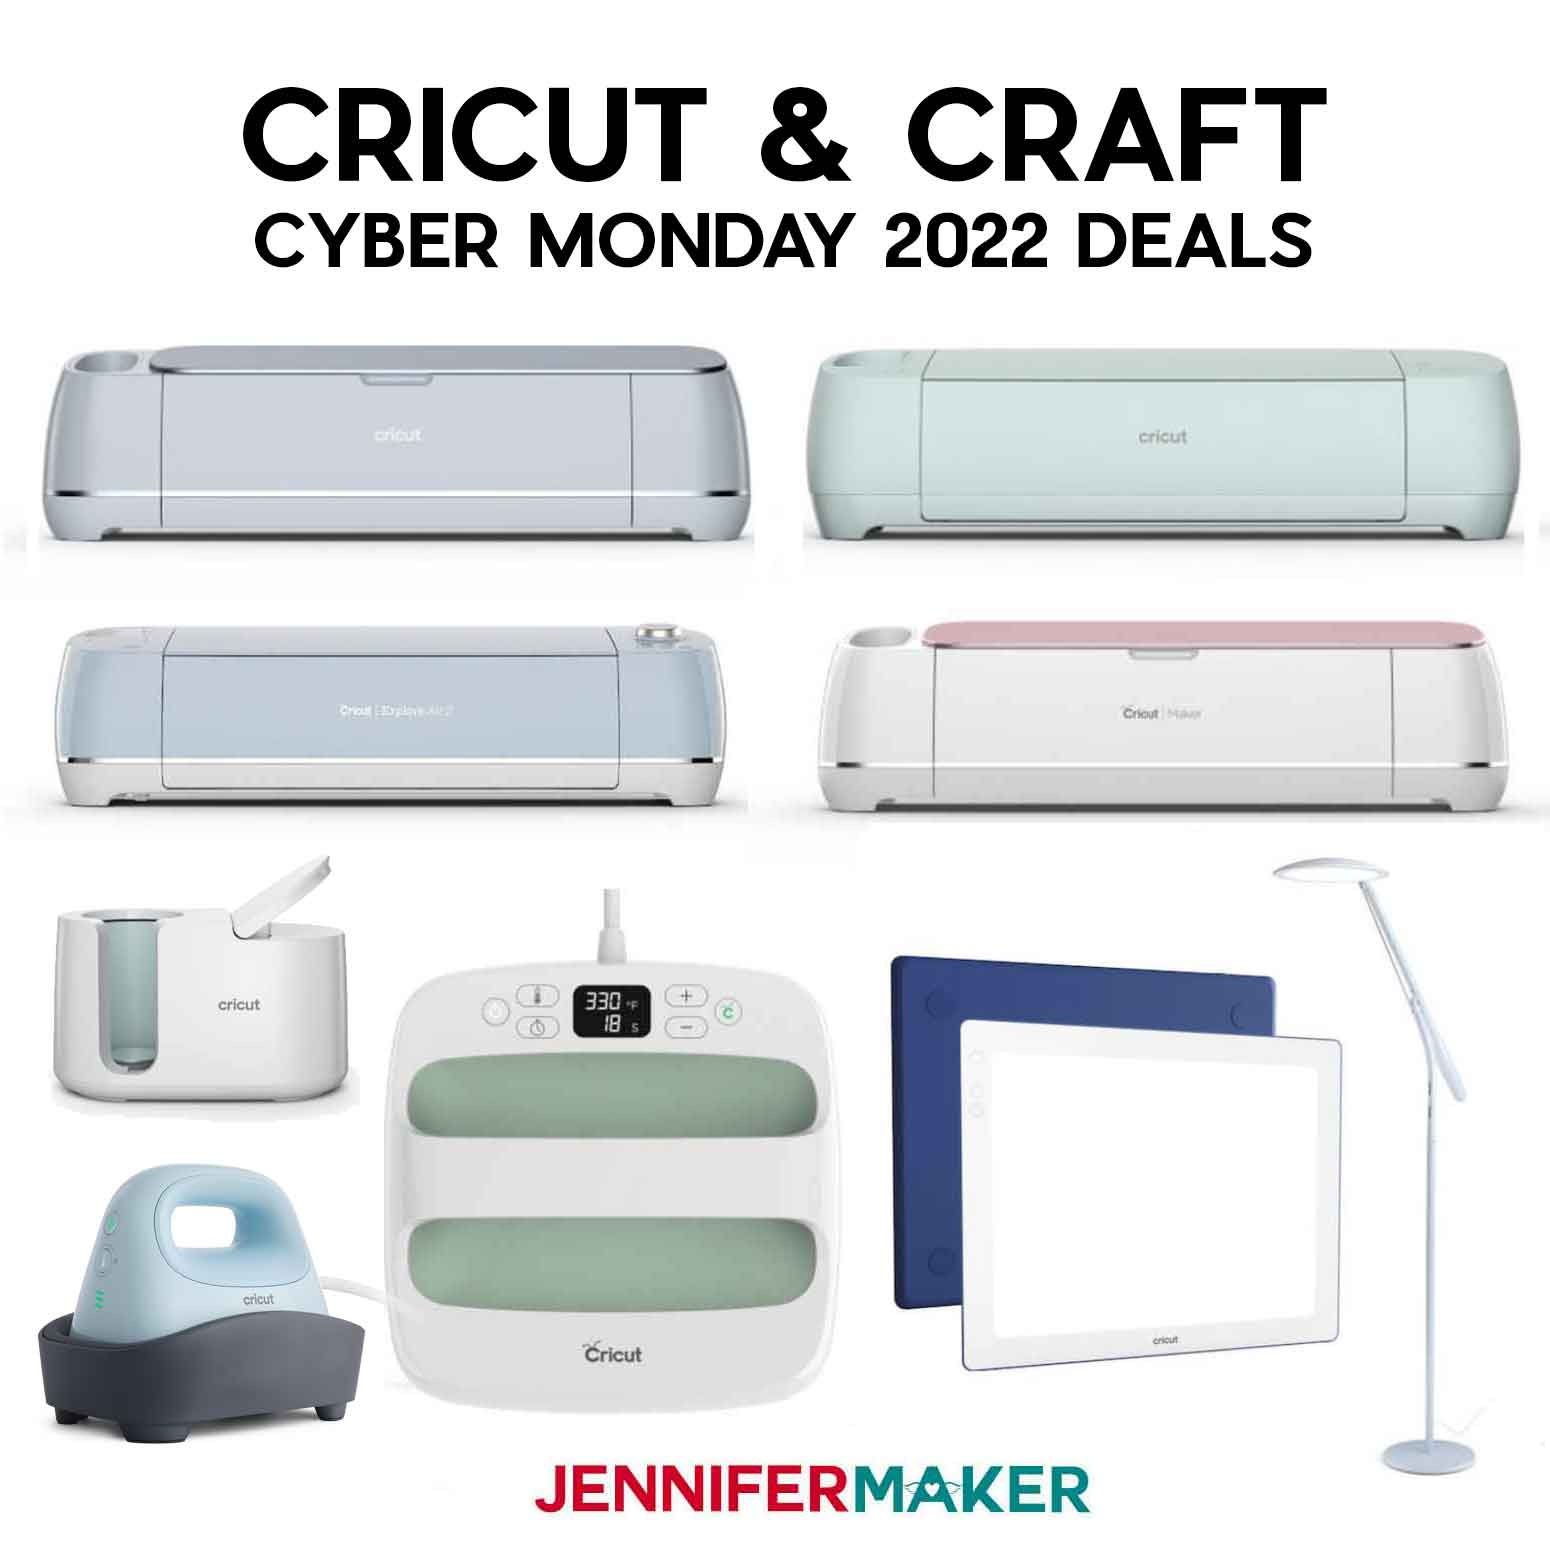 Cyber Monday Deals for Craft Lovers (Includes Cricut!)